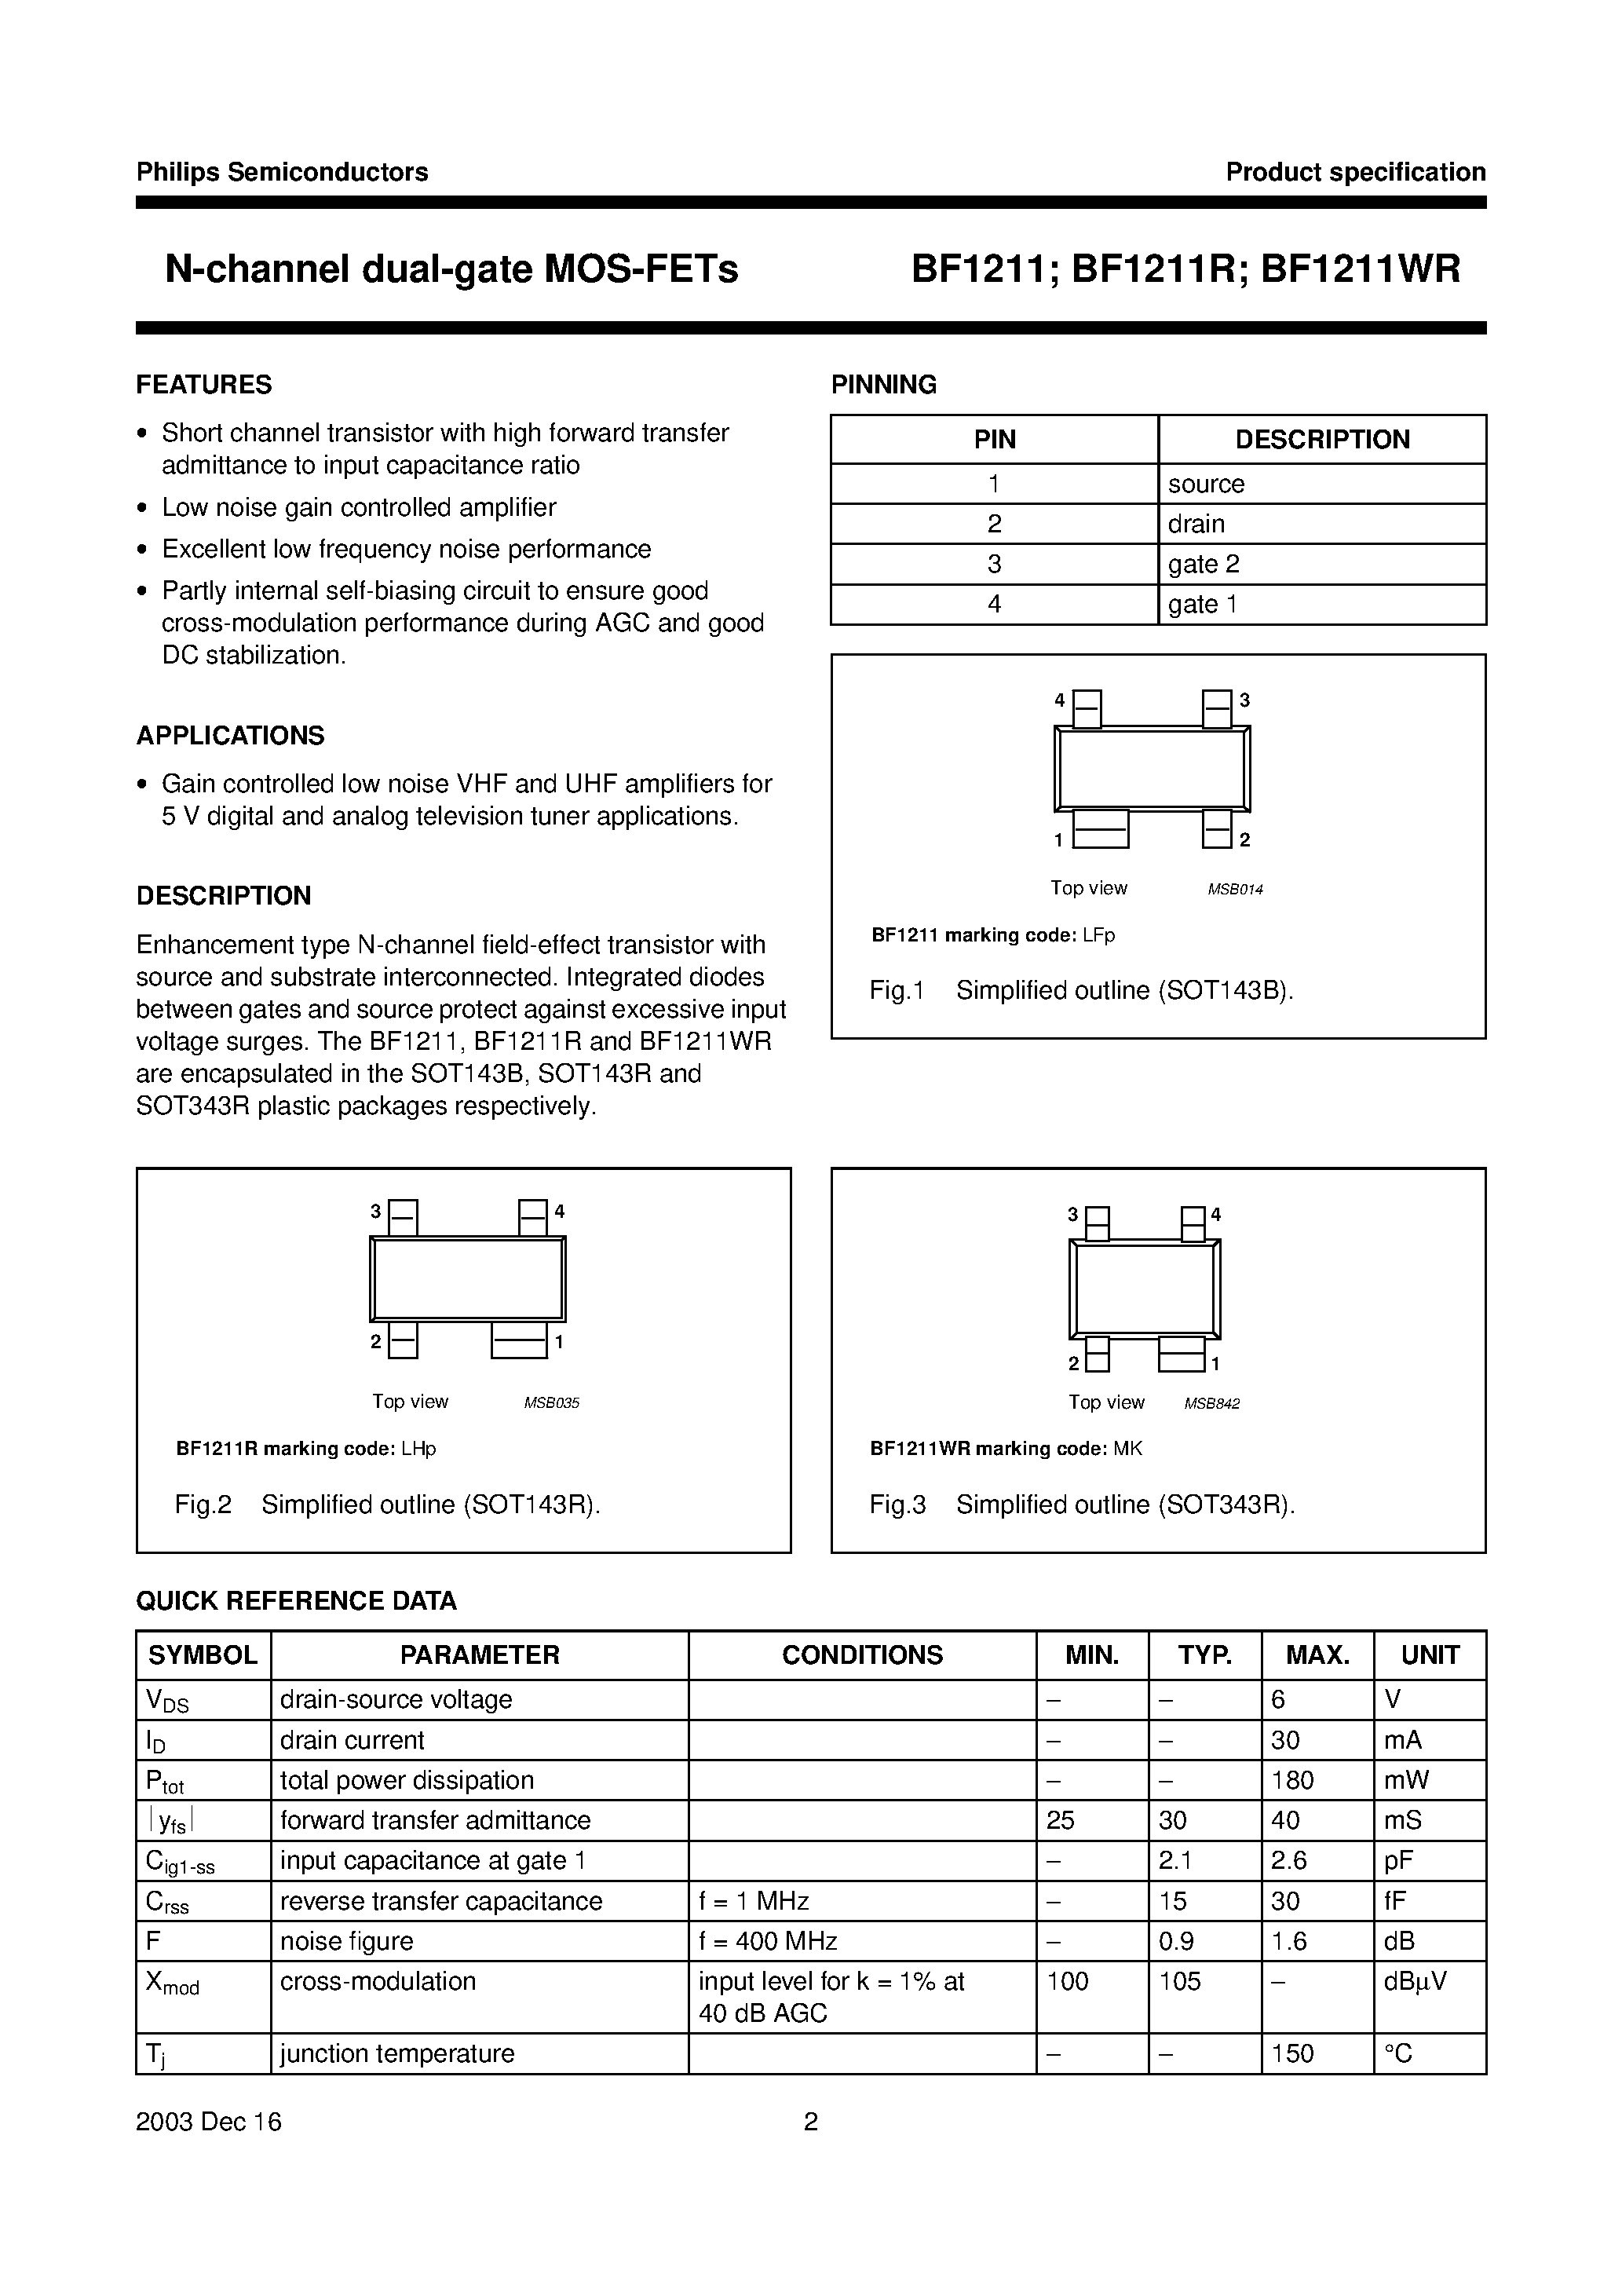 Datasheet BF1211WR - N-channel dual-gate MOS-FETs page 2